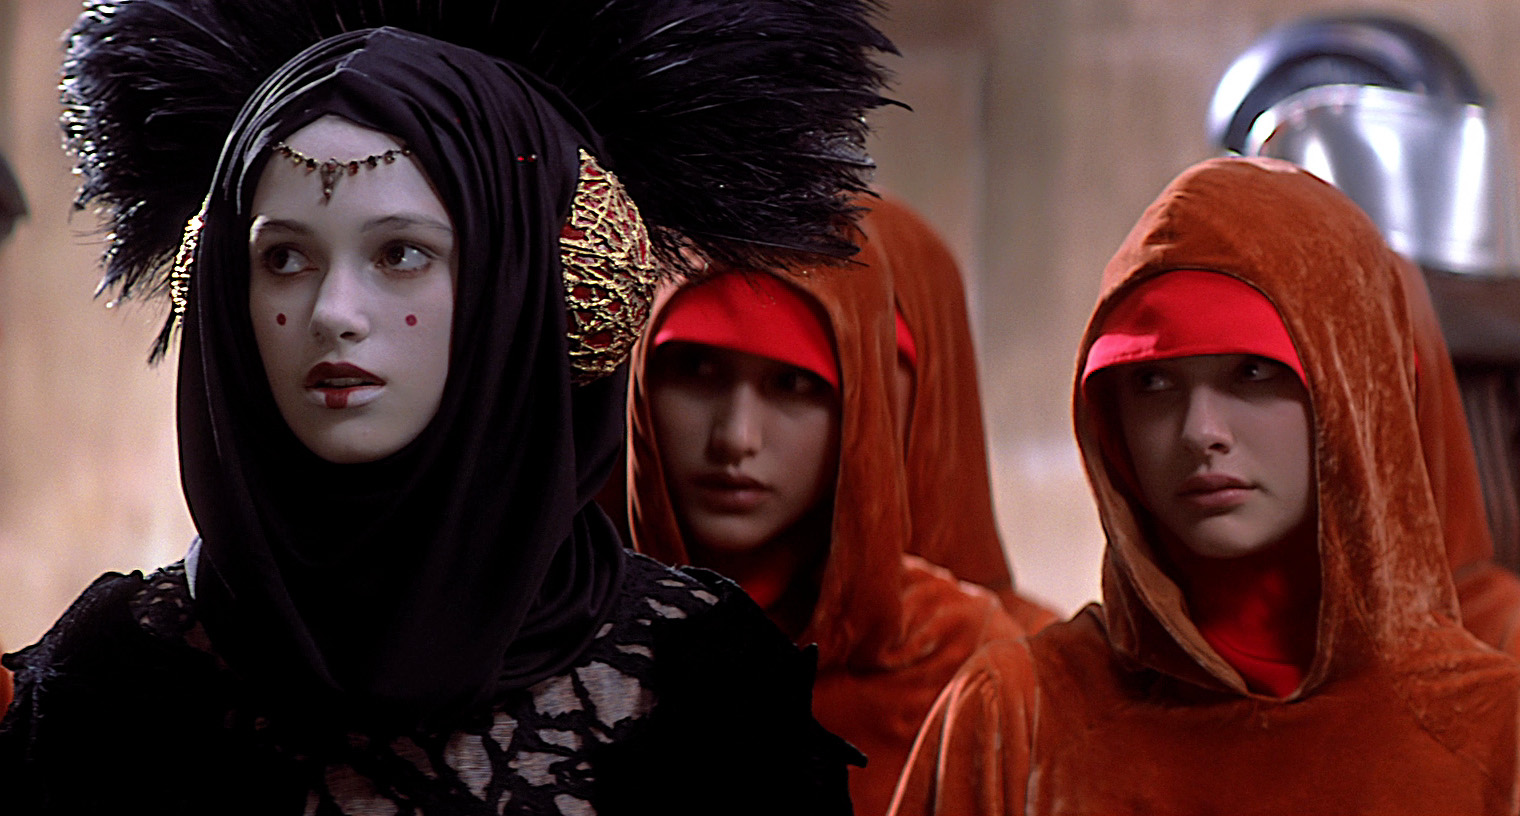 Keira Knightly as Sabe and Natalie Portman as Padme in handmaiden disguise in Star Wars Episode I The Phantom Menace